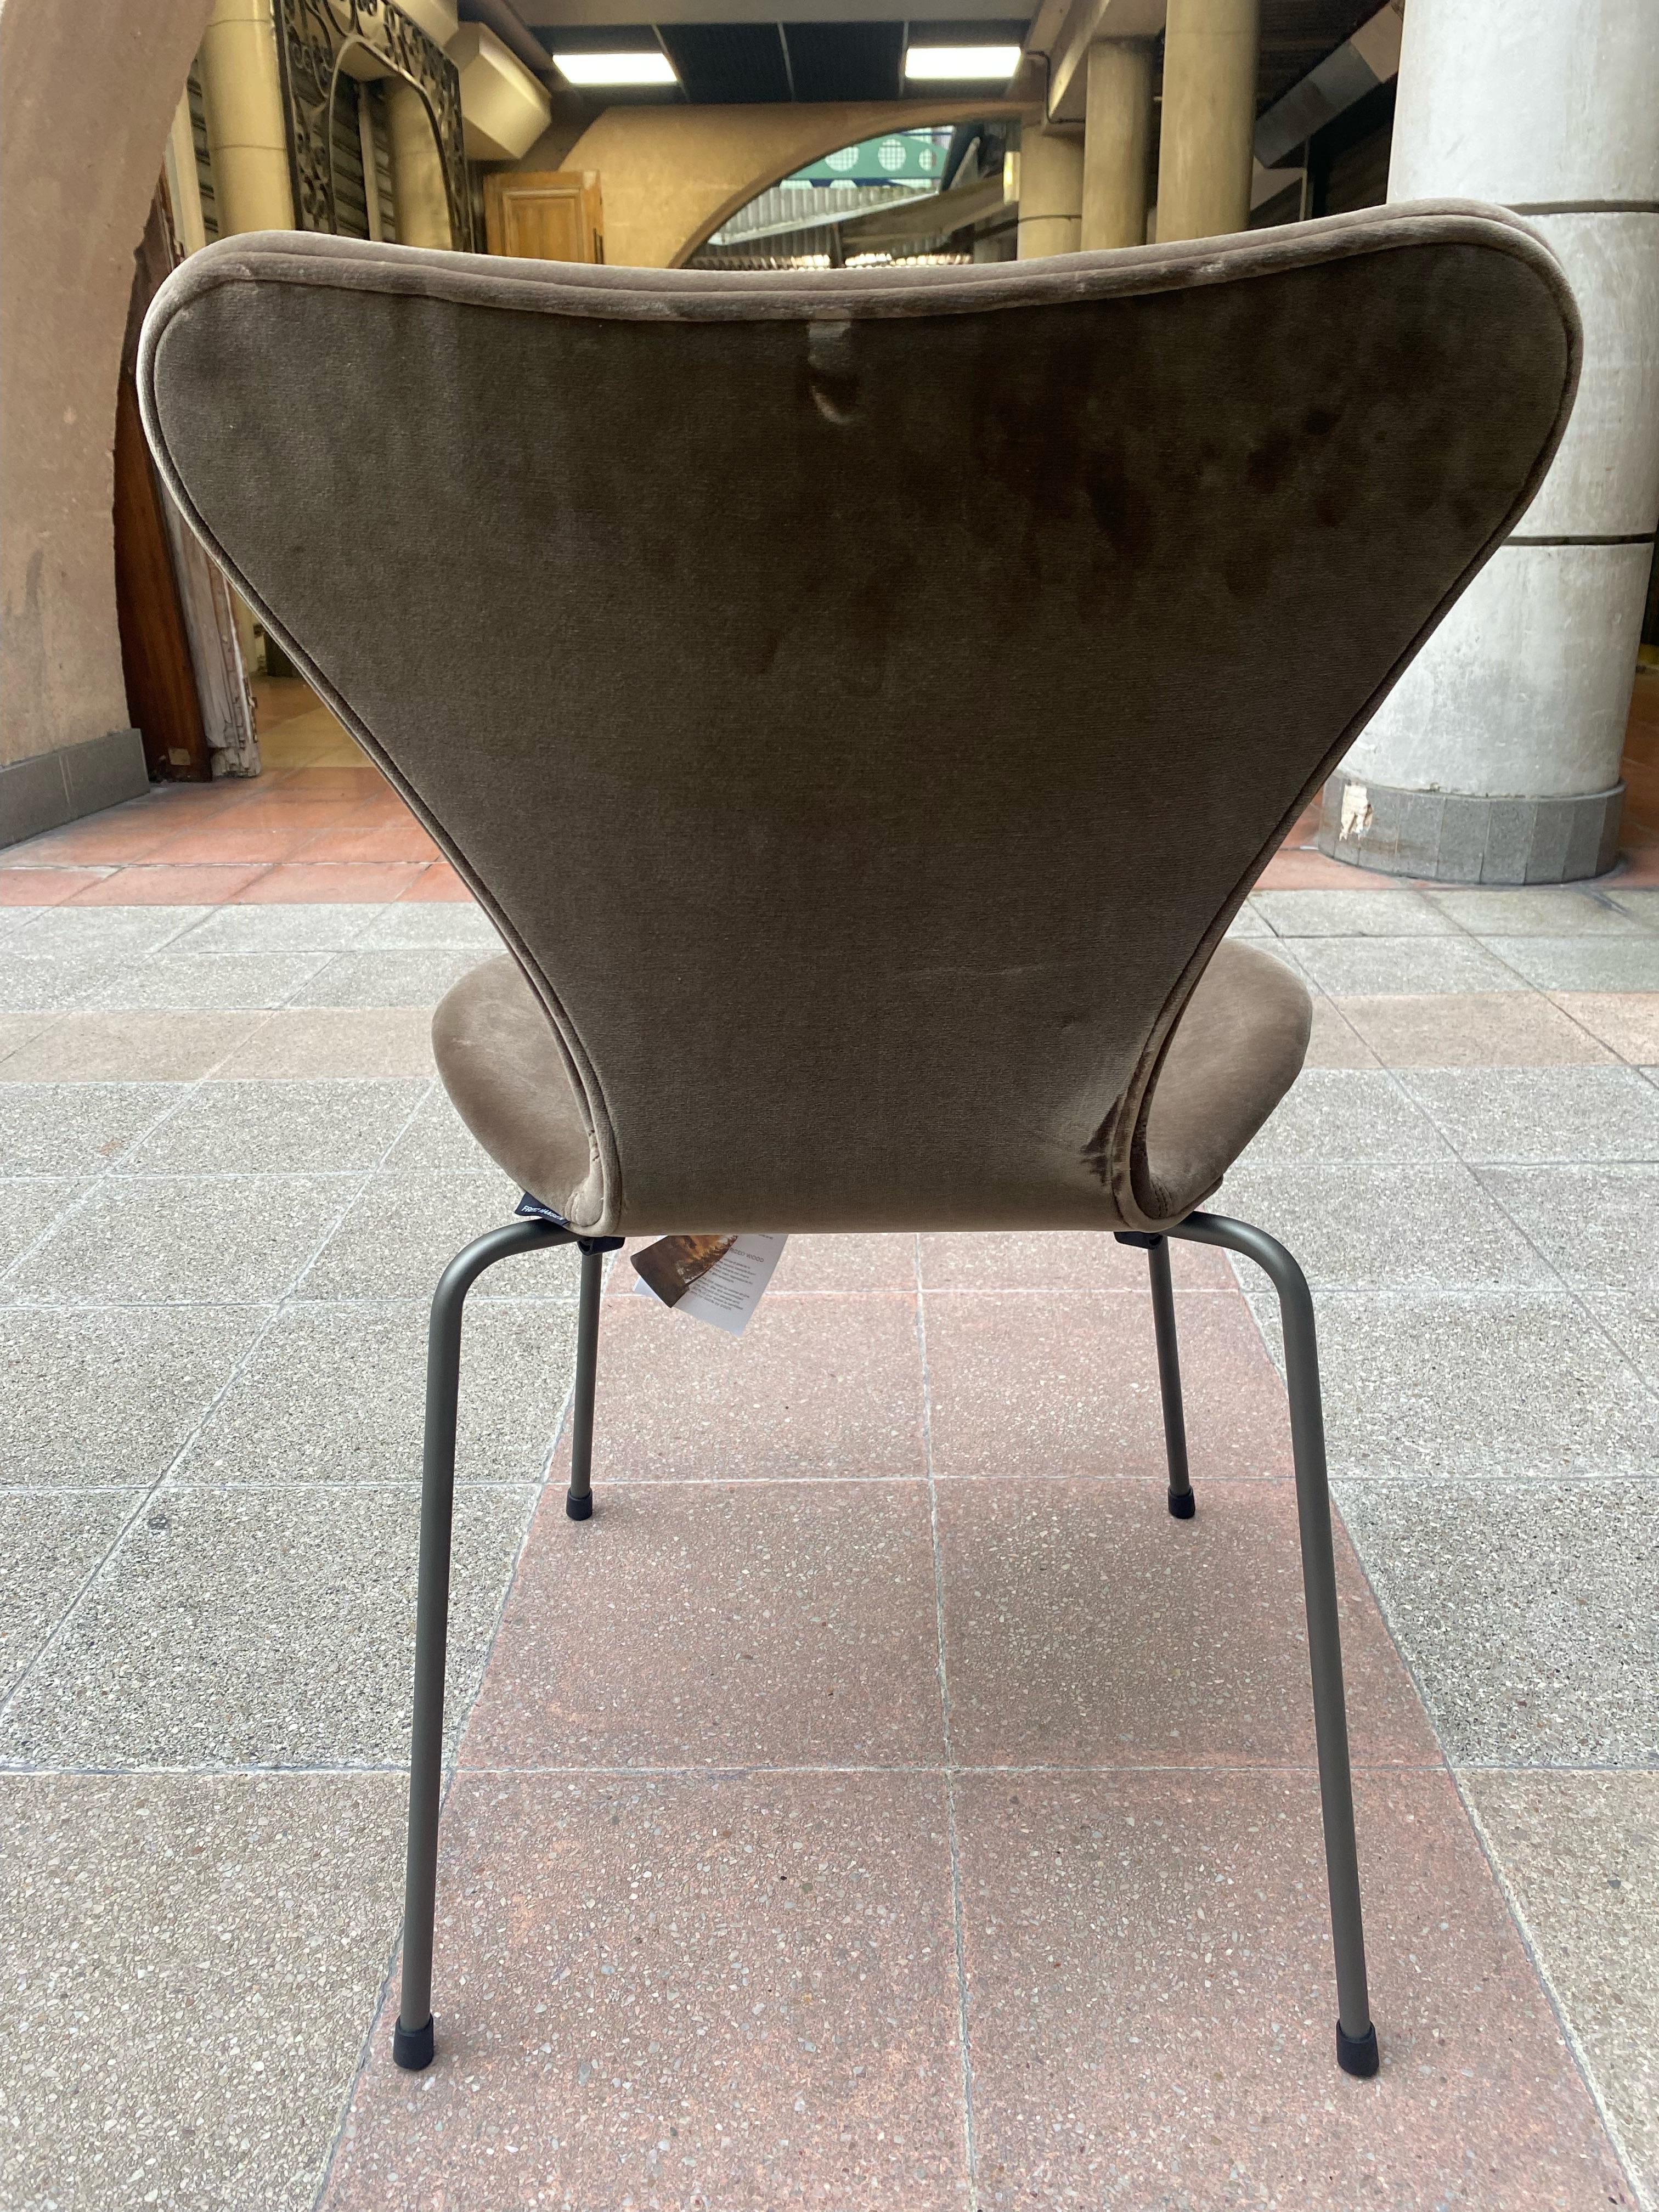 Arne Jacobsen - Series of 4 Series 7 chairs For Sale 1